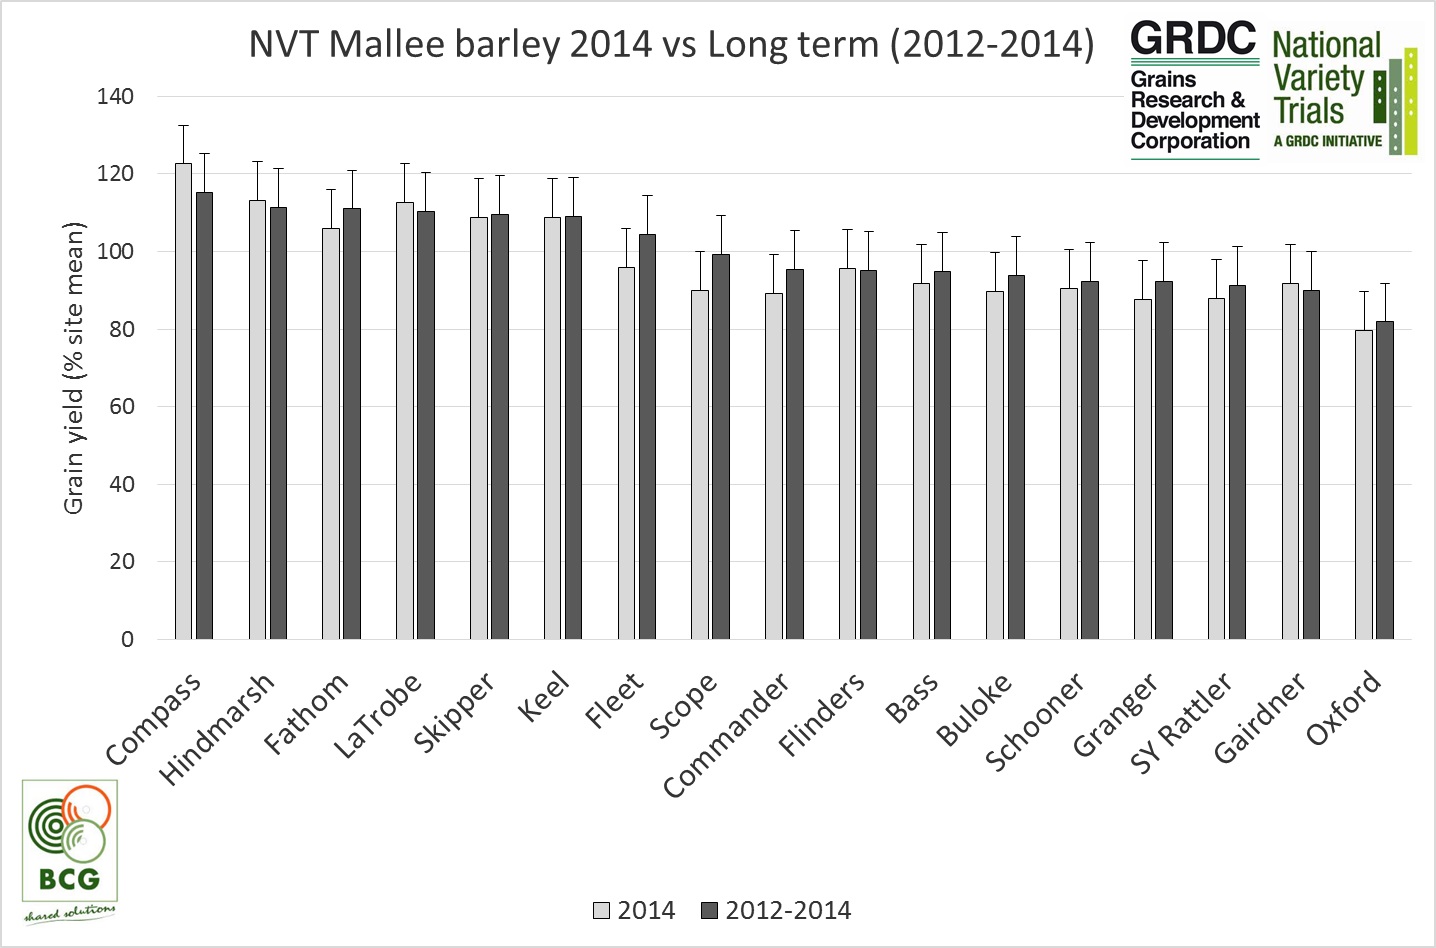 Figure 1. Performance of barley varieties in 2014 compared to previous seasons in the Mallee (NVT and BCG trials). Error bars presented represent the average LSD (10%) for each of the trials included.